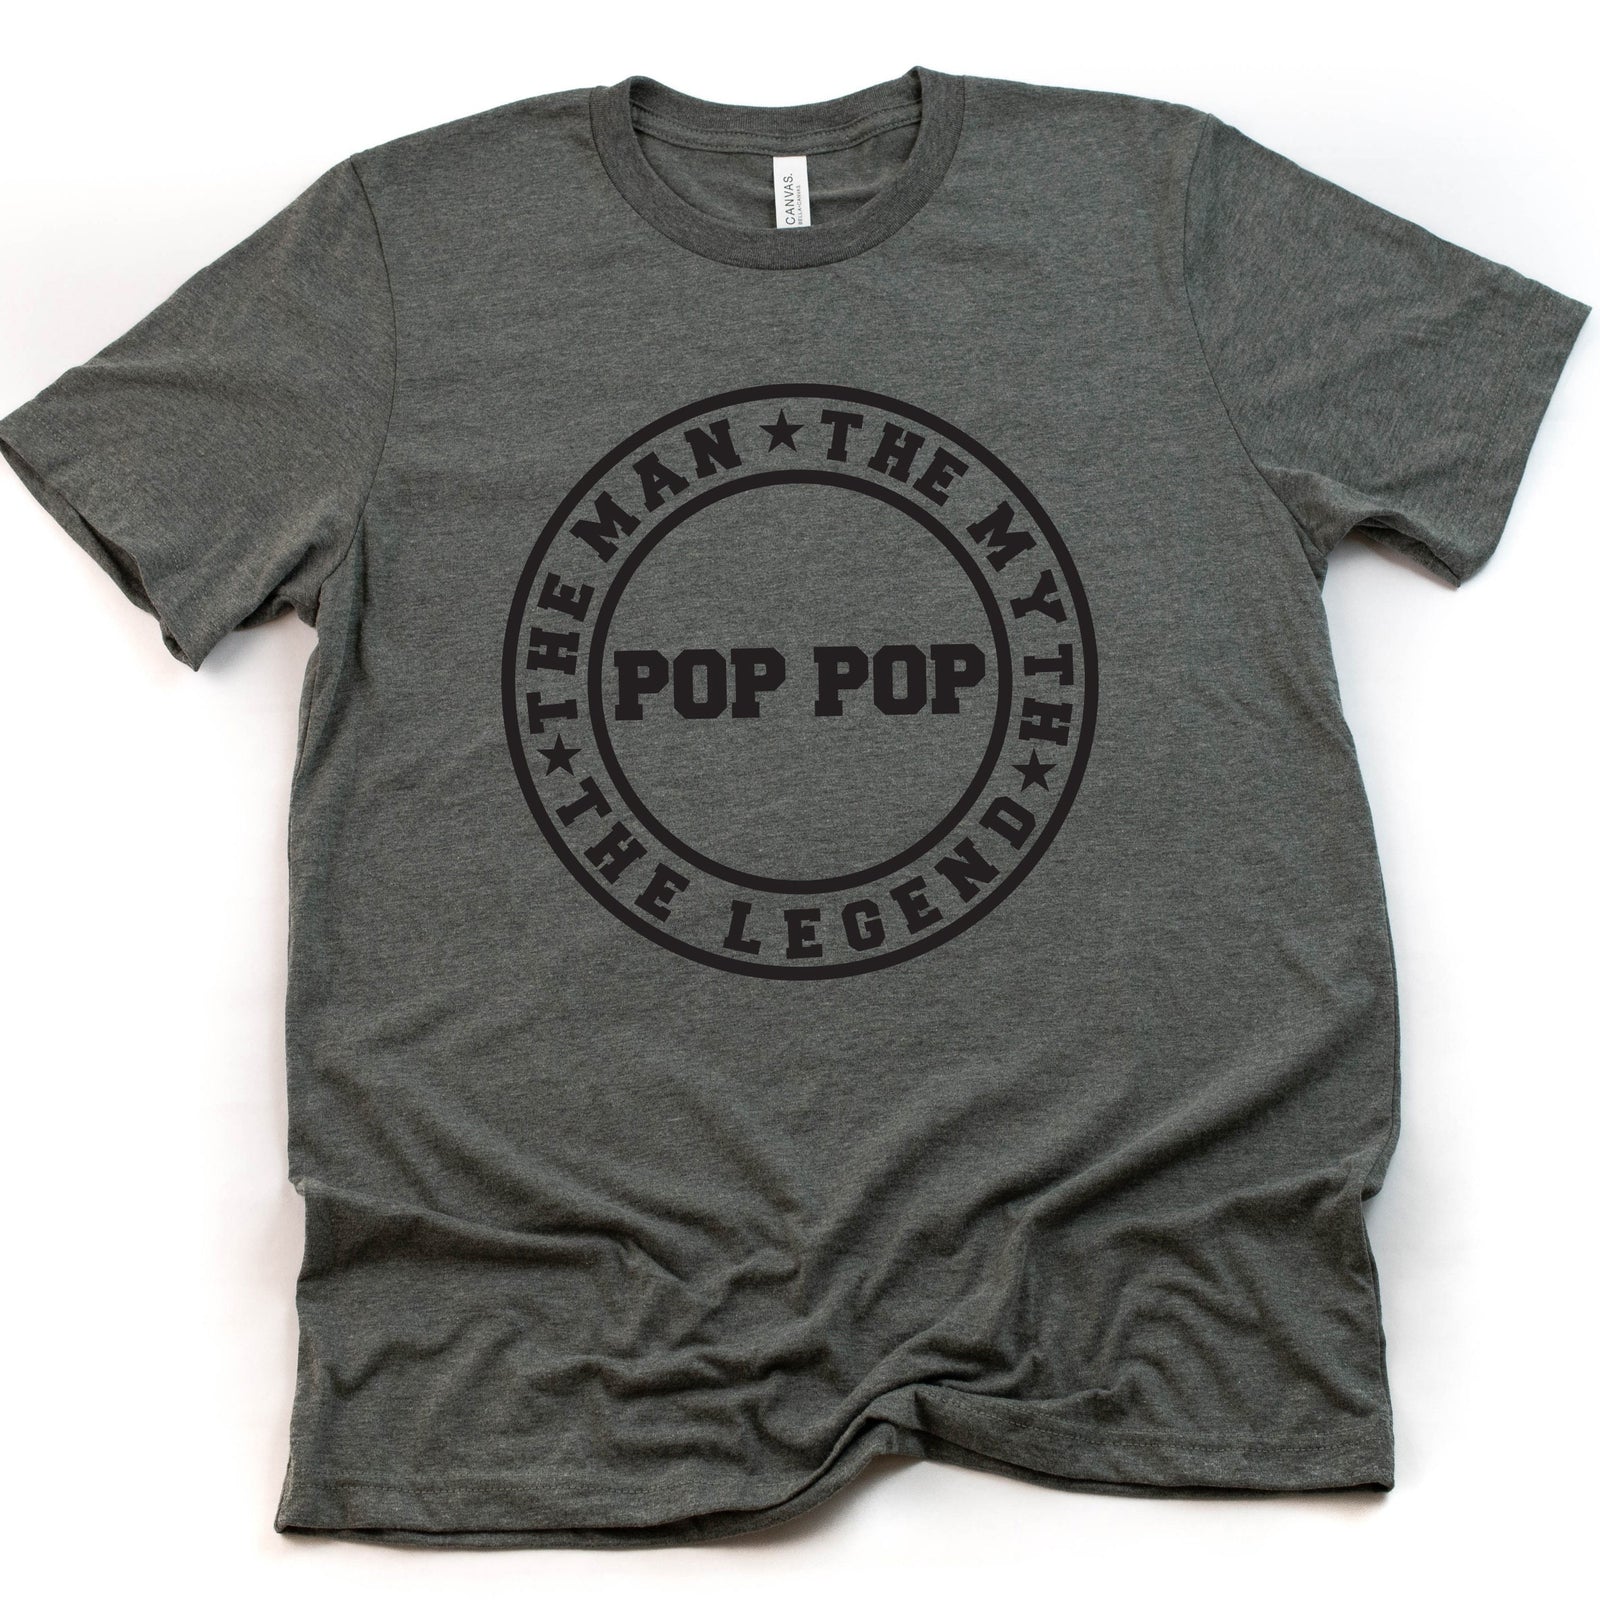 Pop Pop T Shirt -The Man The Myth The Legend - Father's Day Gift - Custom Family Shirts